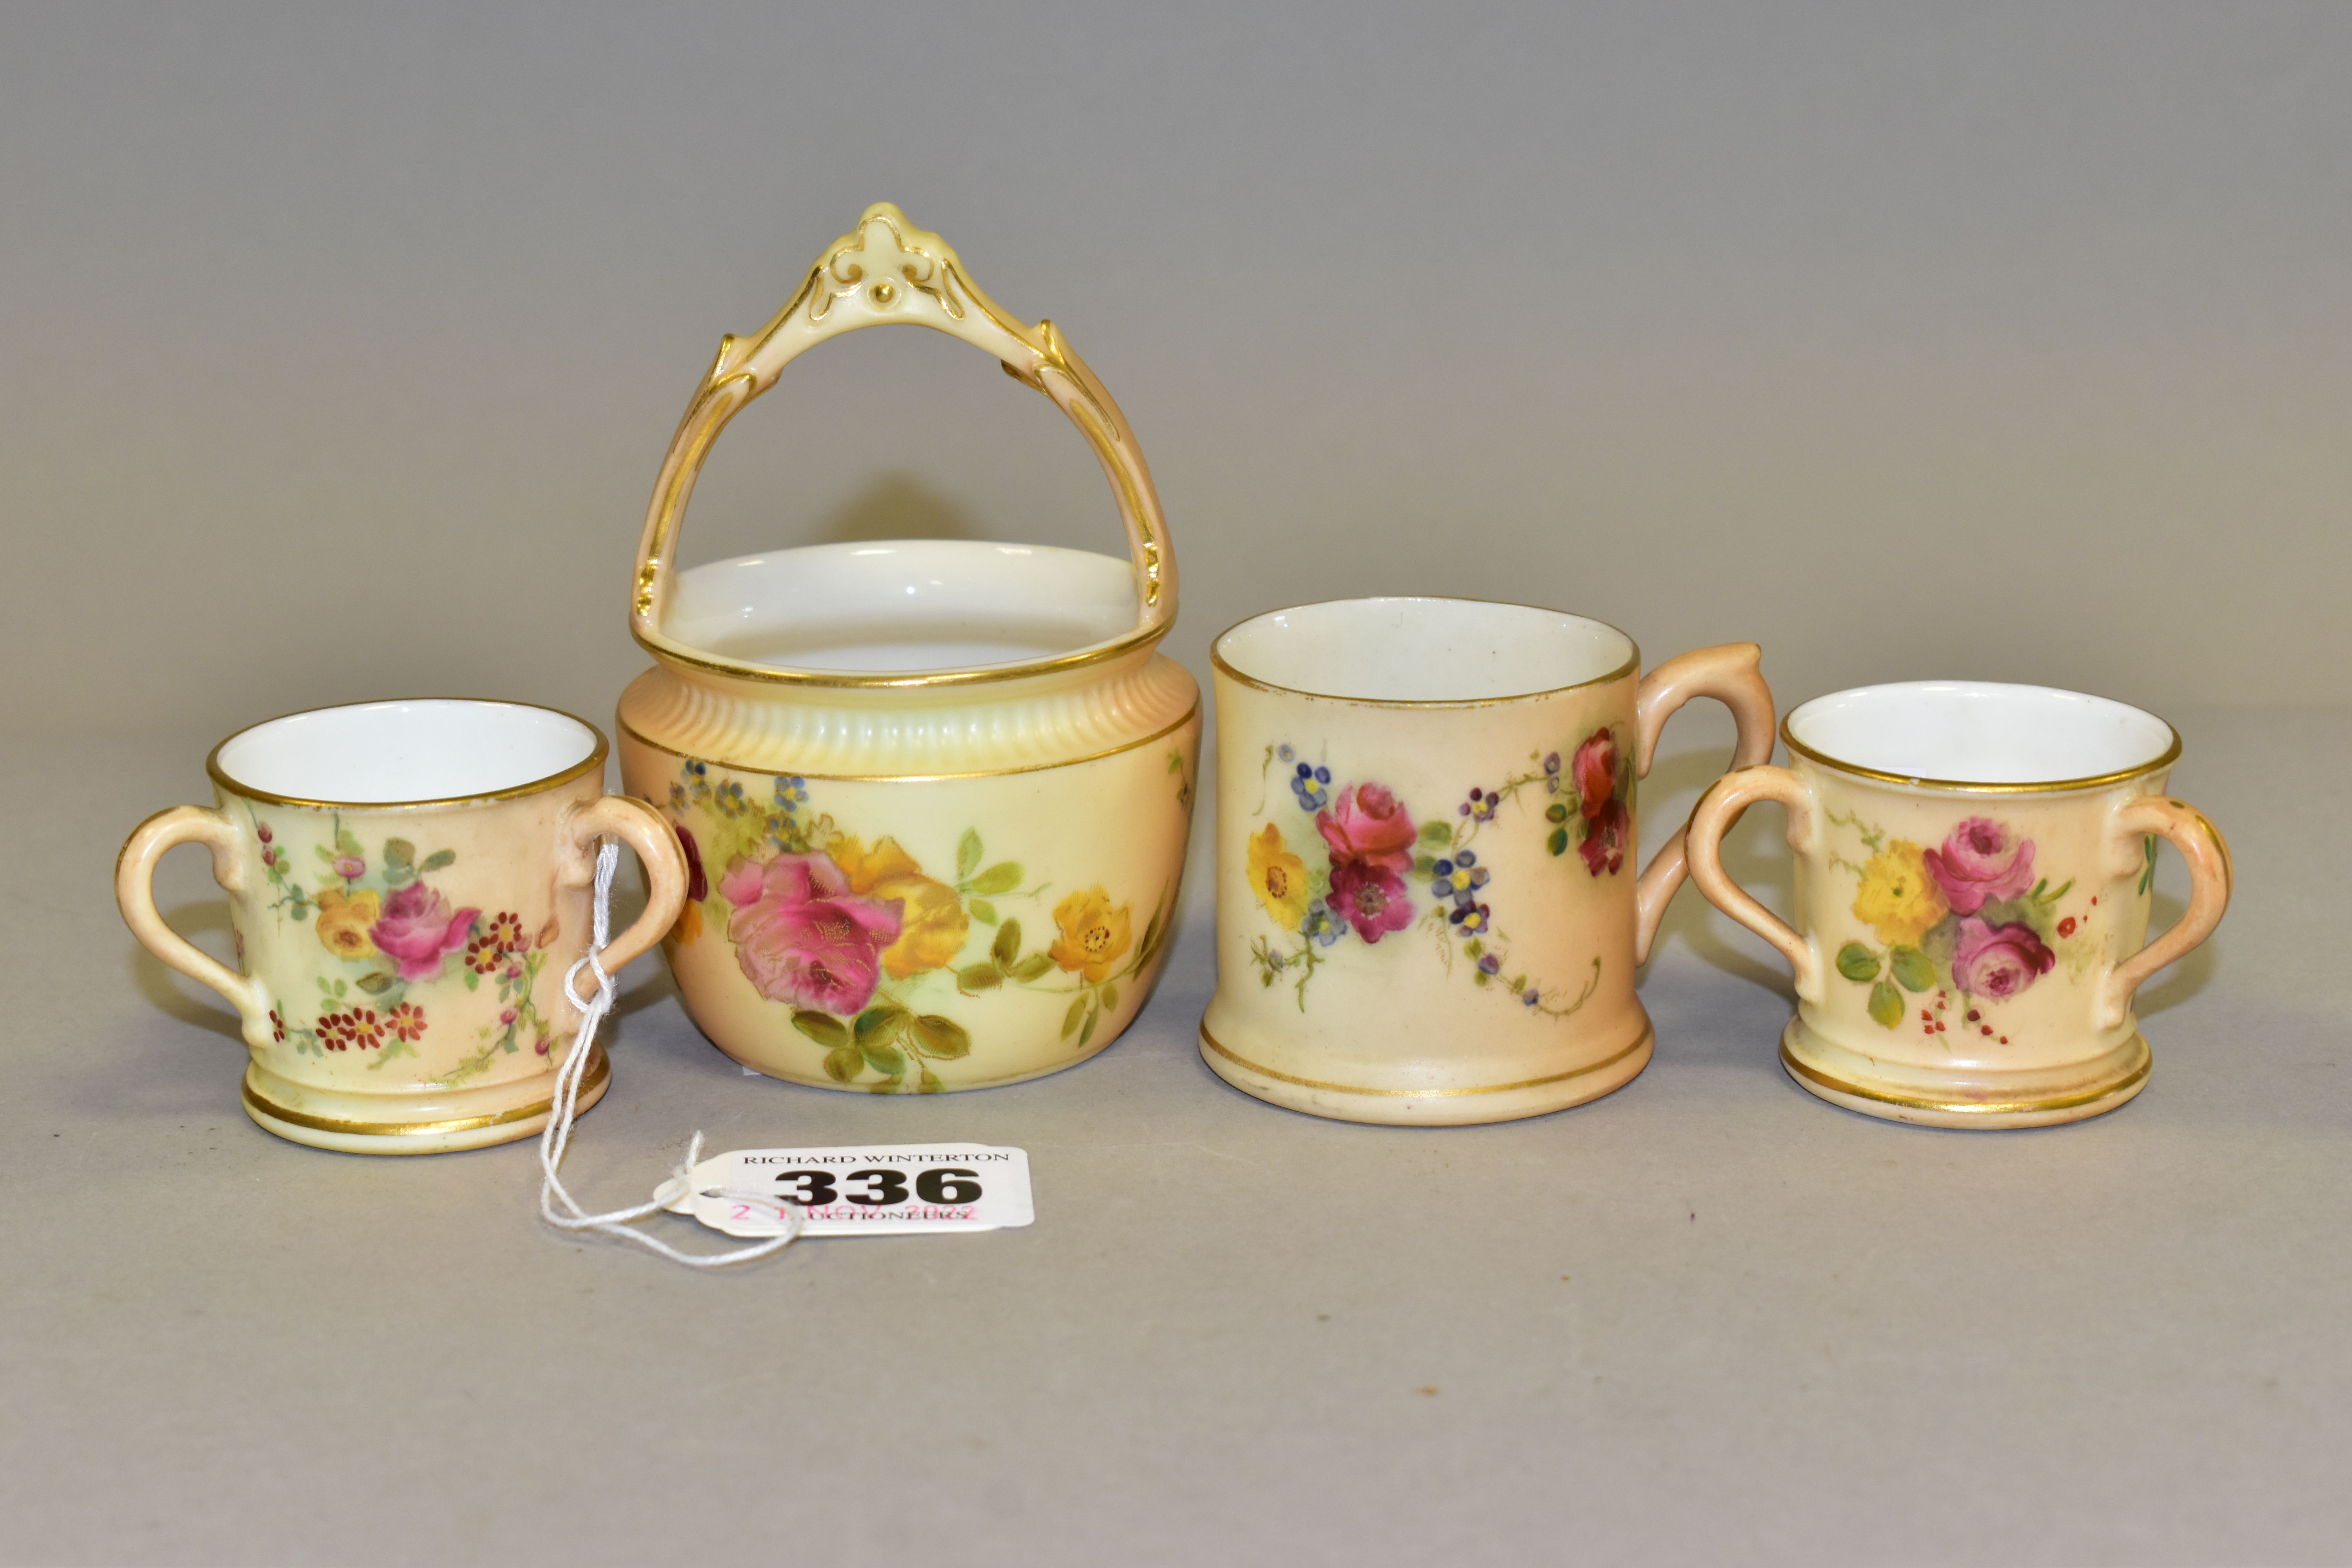 FOUR PIECES OF ROYAL WORCESTER BLUSH IVORY WARES, each printed and tinted with flowers, with green